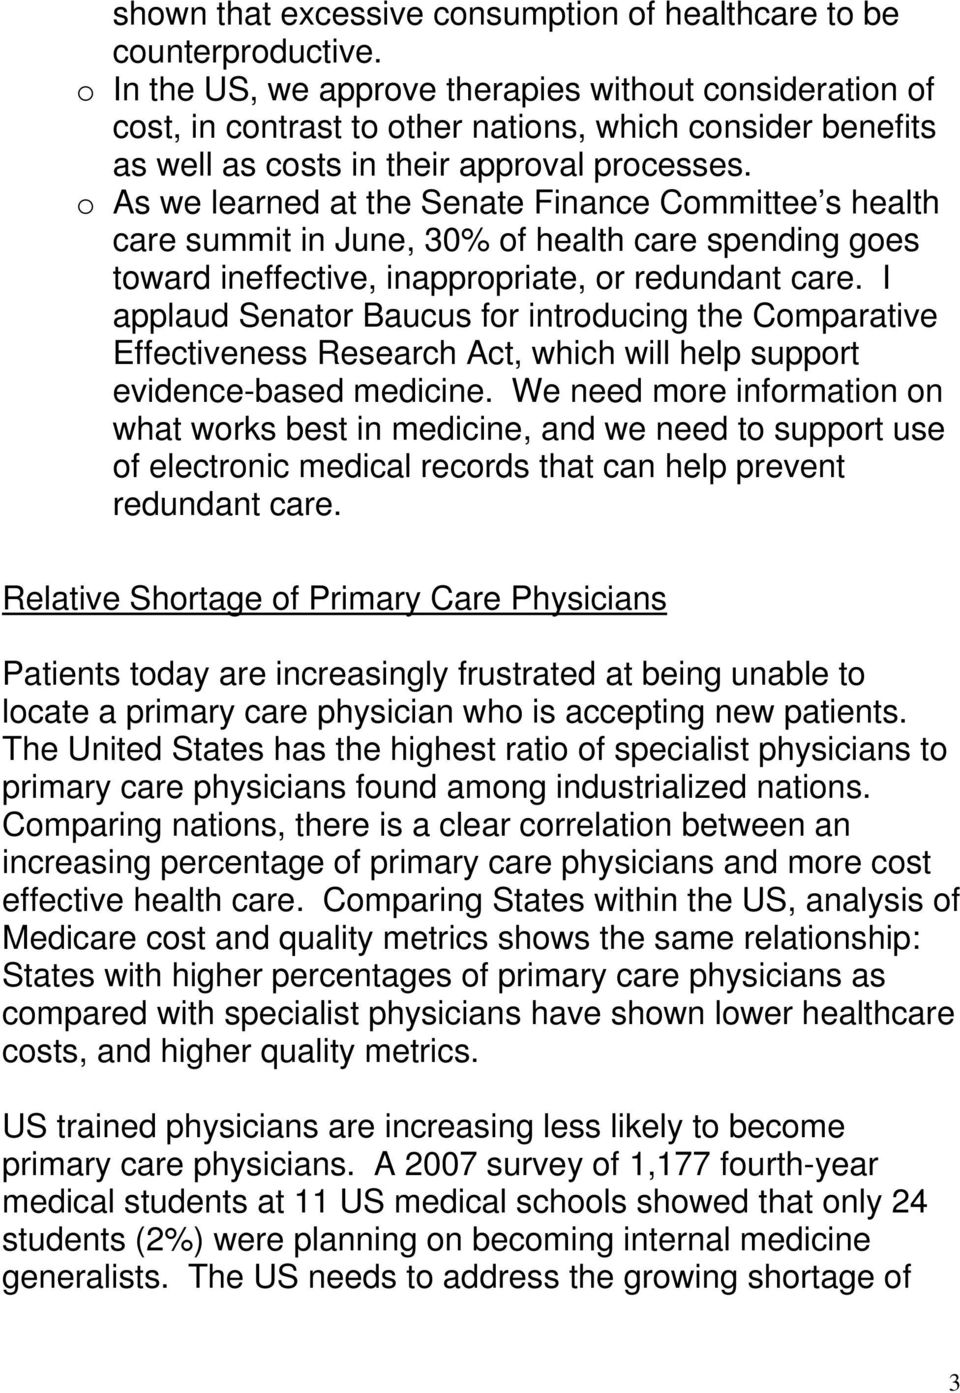 o As we learned at the Senate Finance Committee s health care summit in June, 30% of health care spending goes toward ineffective, inappropriate, or redundant care.